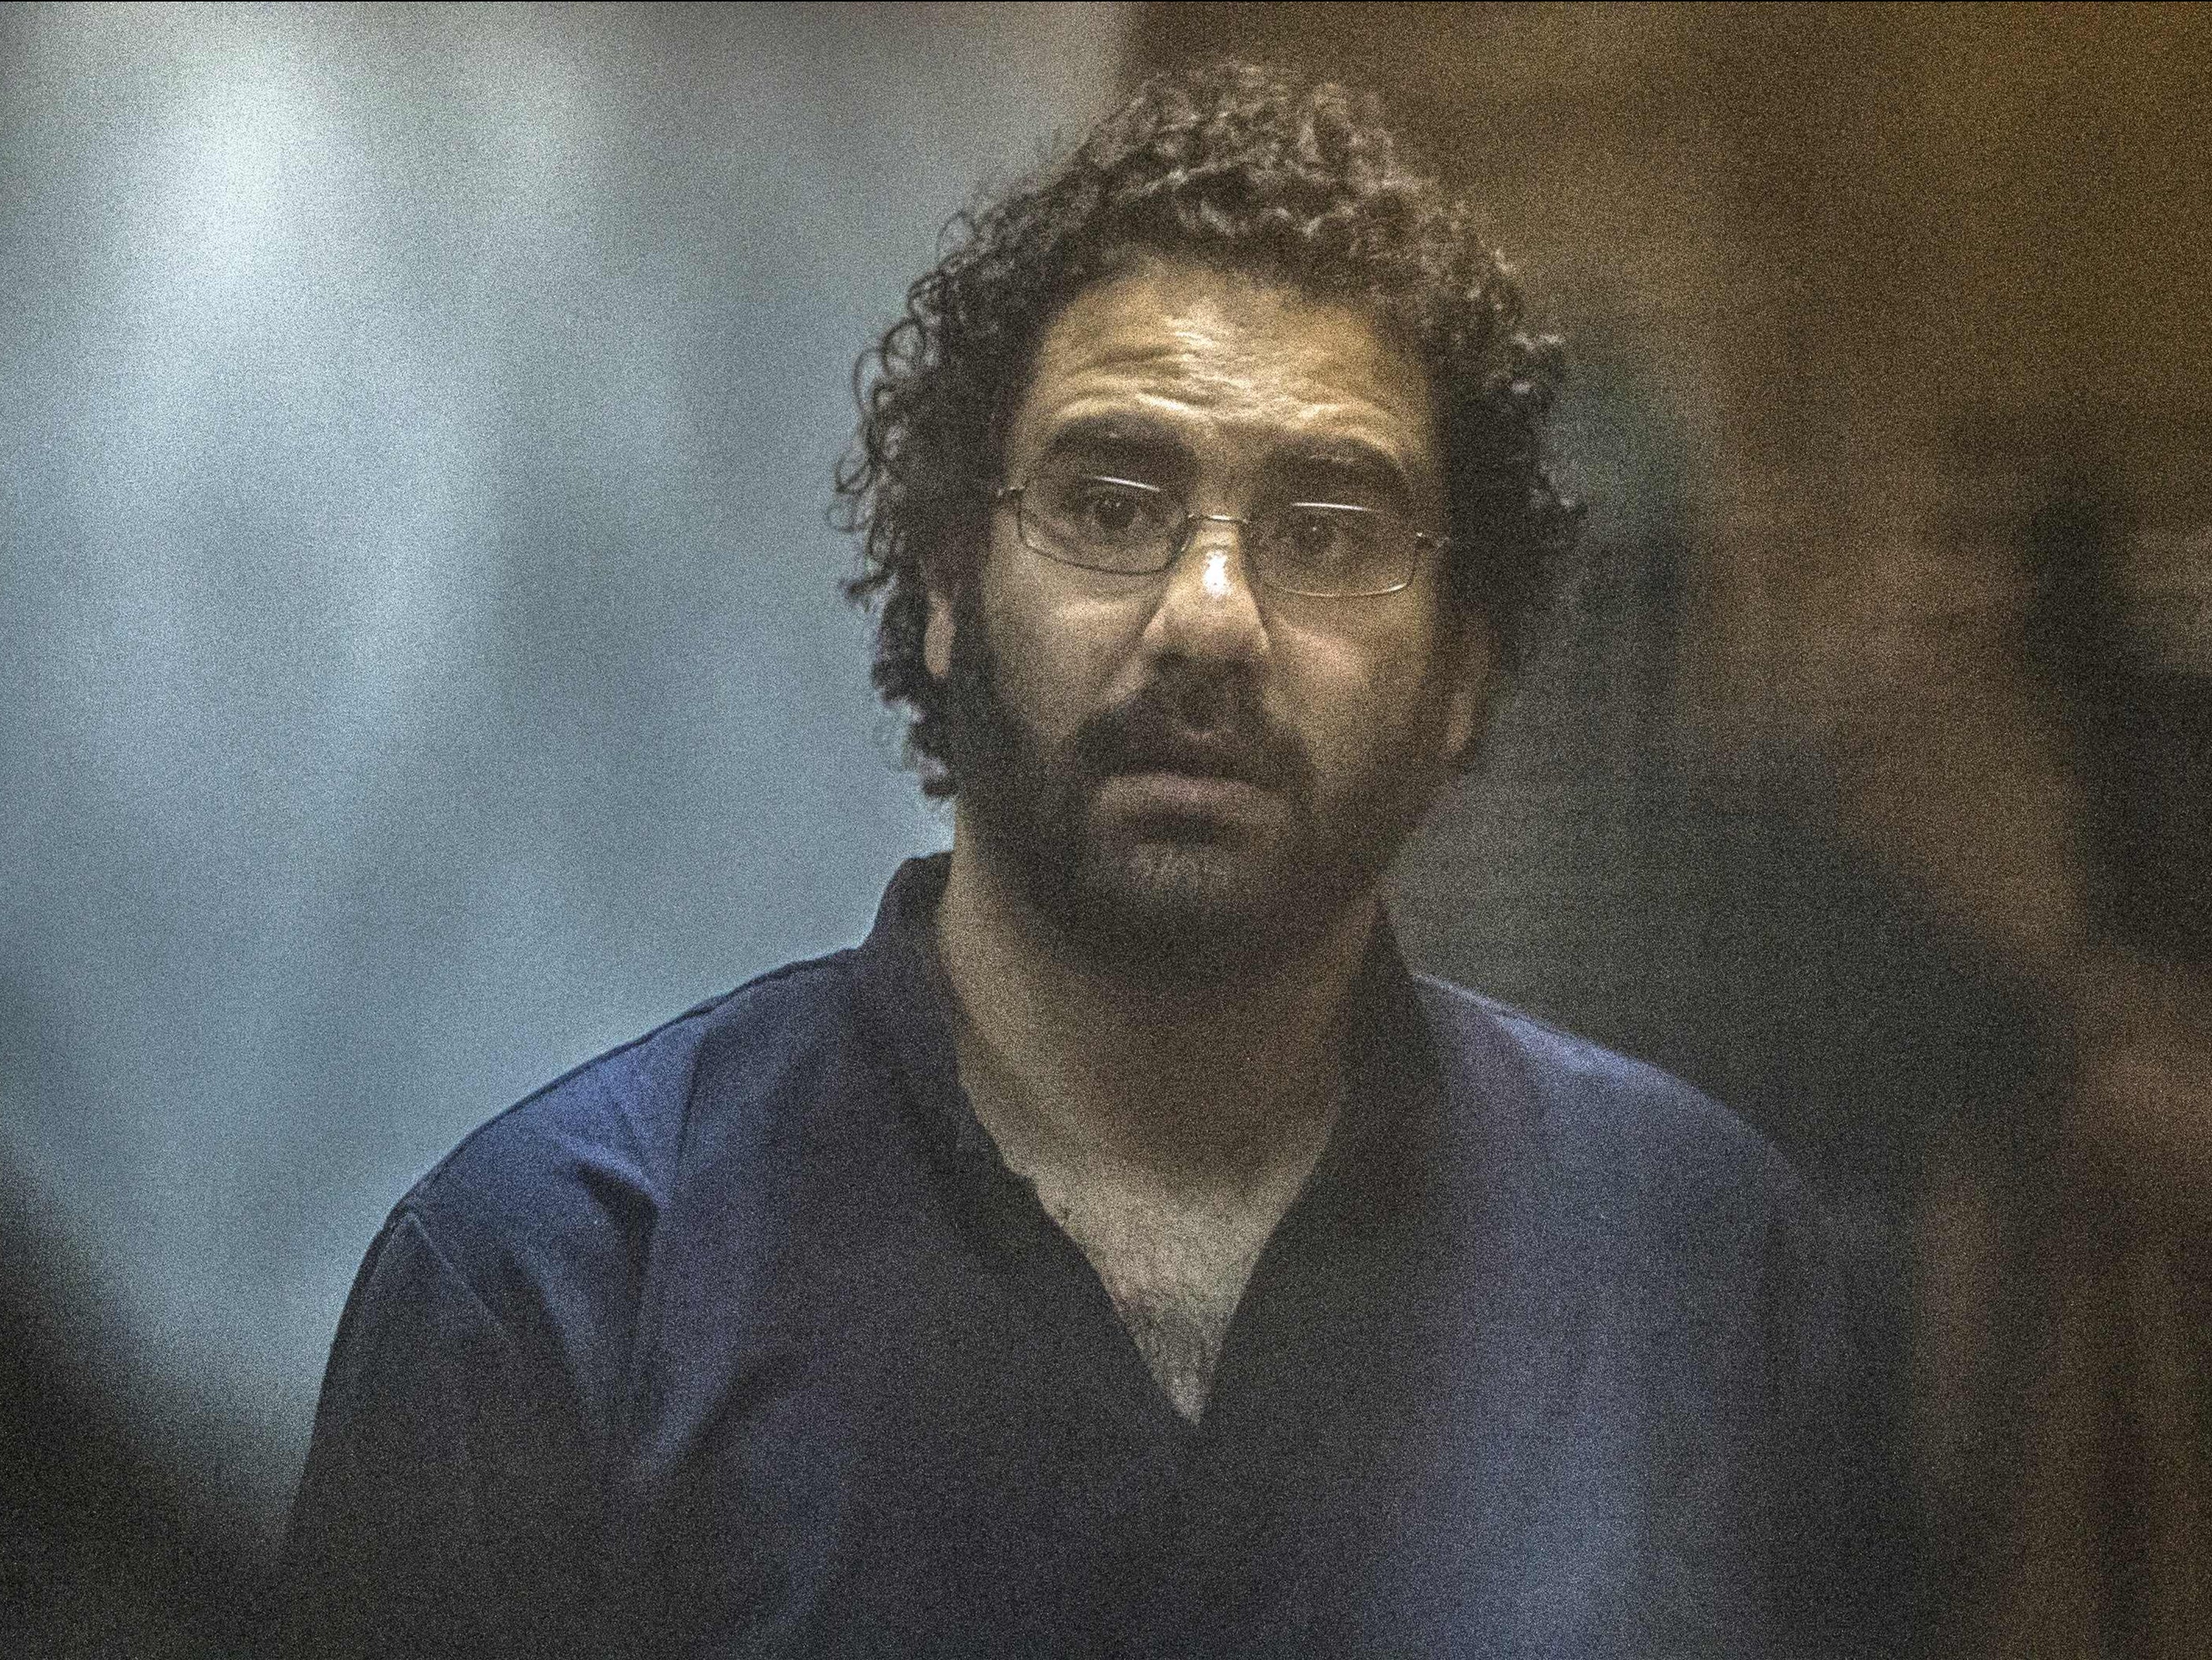 British-Egyptian activist and blogger Alaa Abdel Fattah pictured during 2015 trial